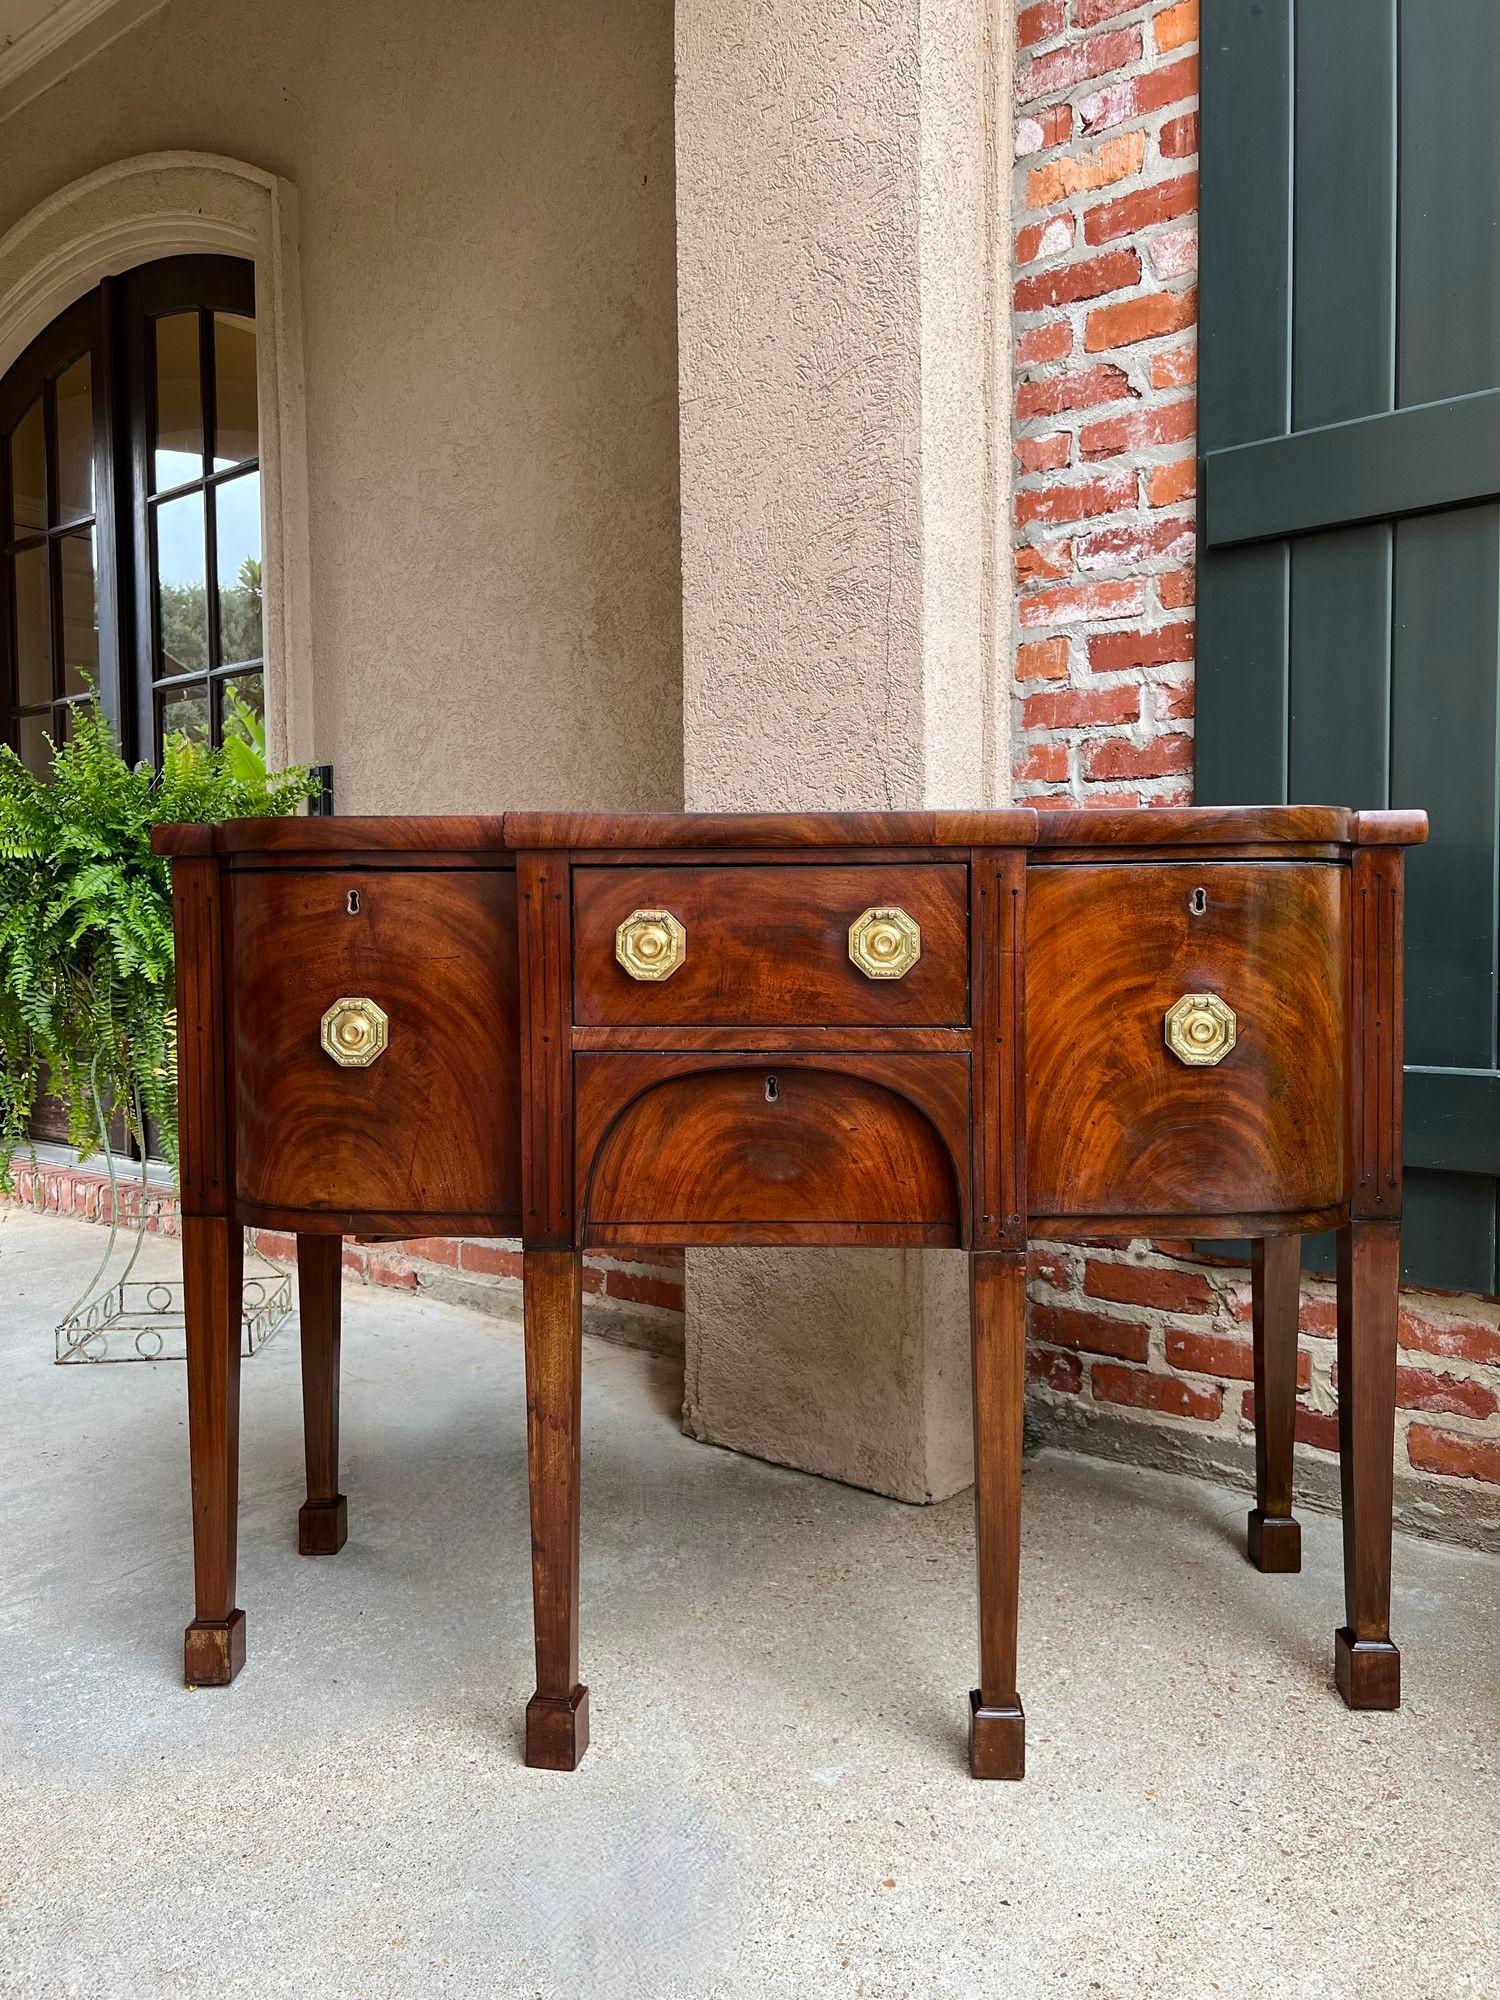 British Antique English Flame Mahogany Buffet Sideboard Regency Neoclassical Style